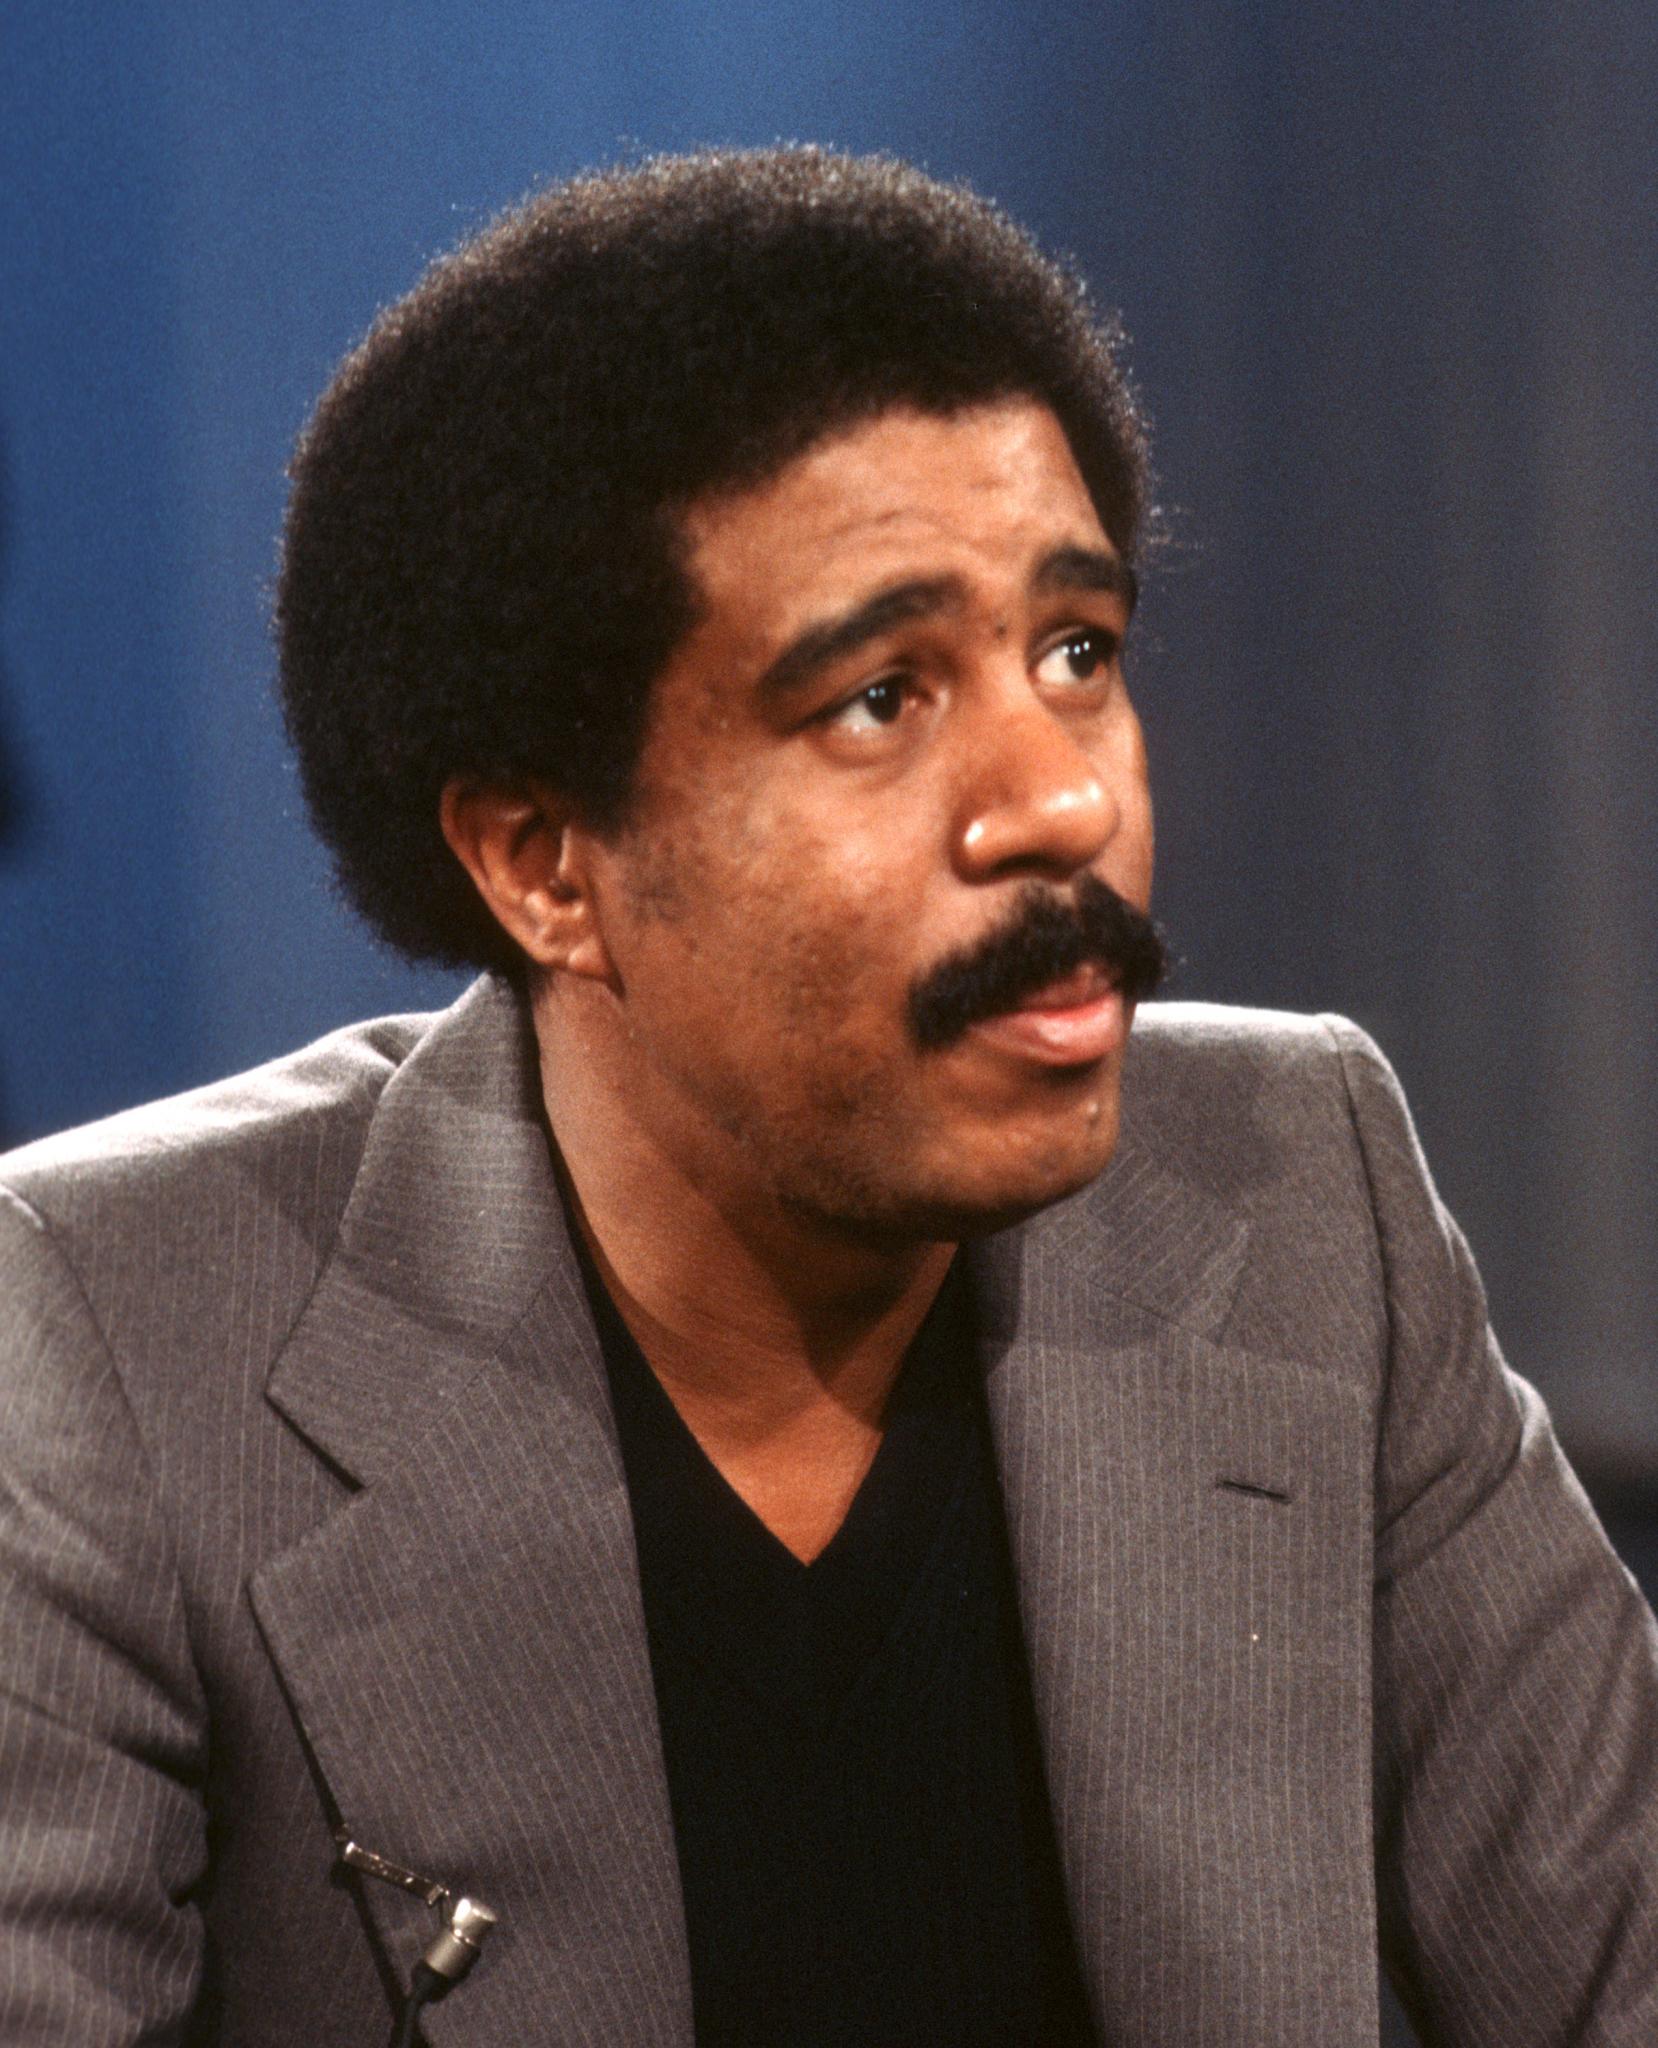 Richard Pryor, Moms Mabley, Redd Foxx to Be Inducted into Apollo Theater's Walk of Fame